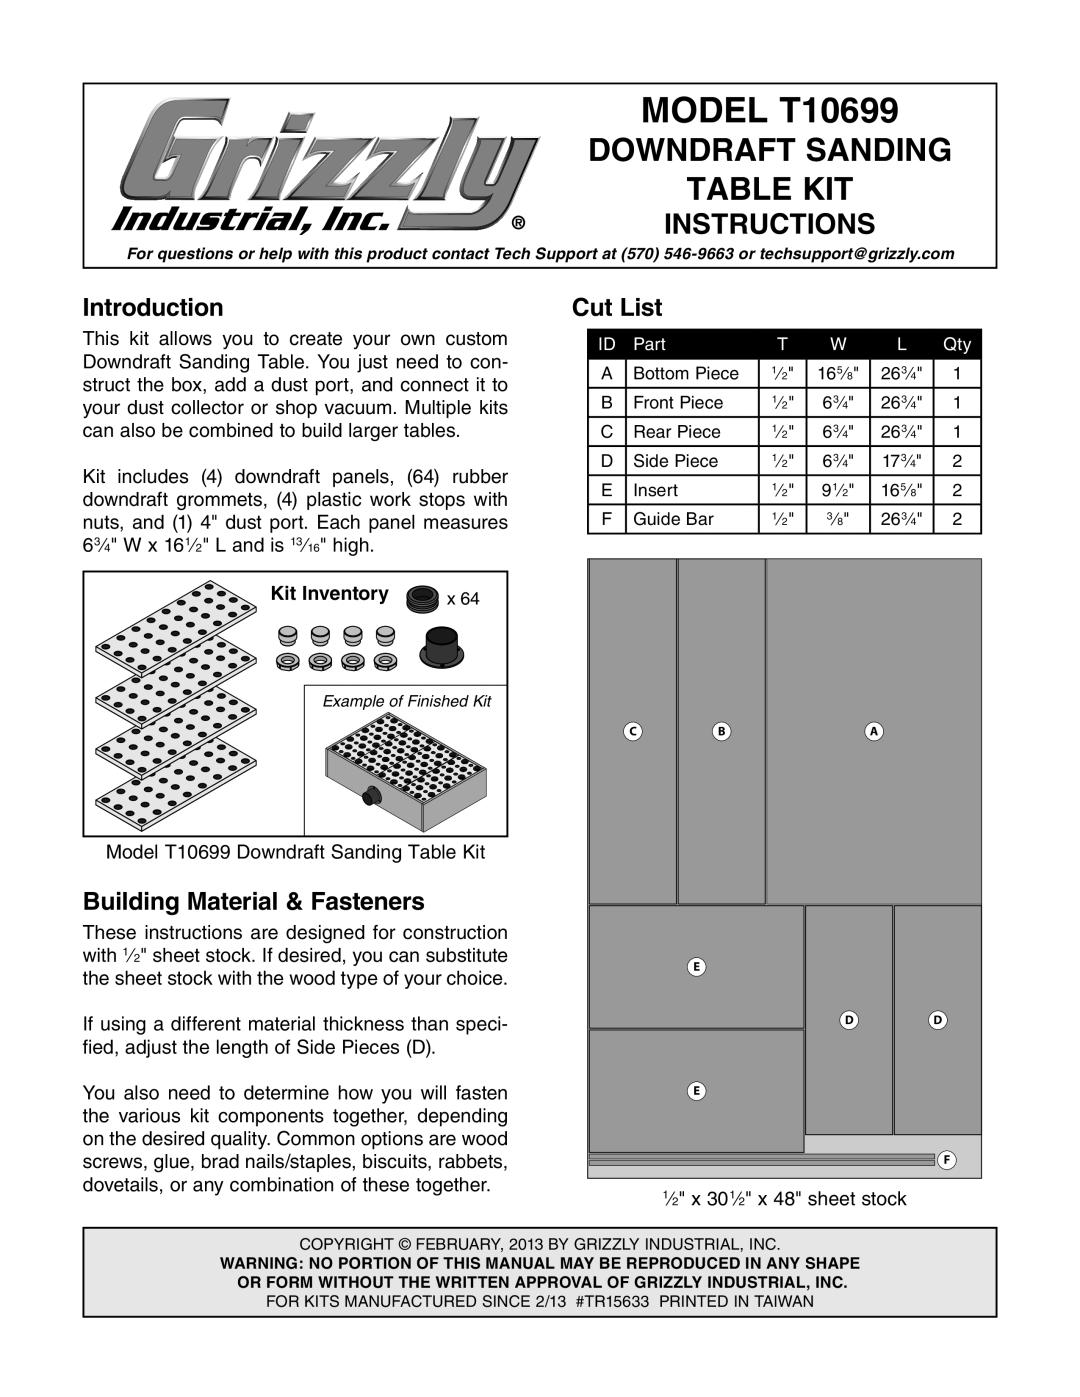 Grizzly manual Introduction, Cut List, Building Material & Fasteners, Kit Inventory, MODEL T10699, Downdraft Sanding 